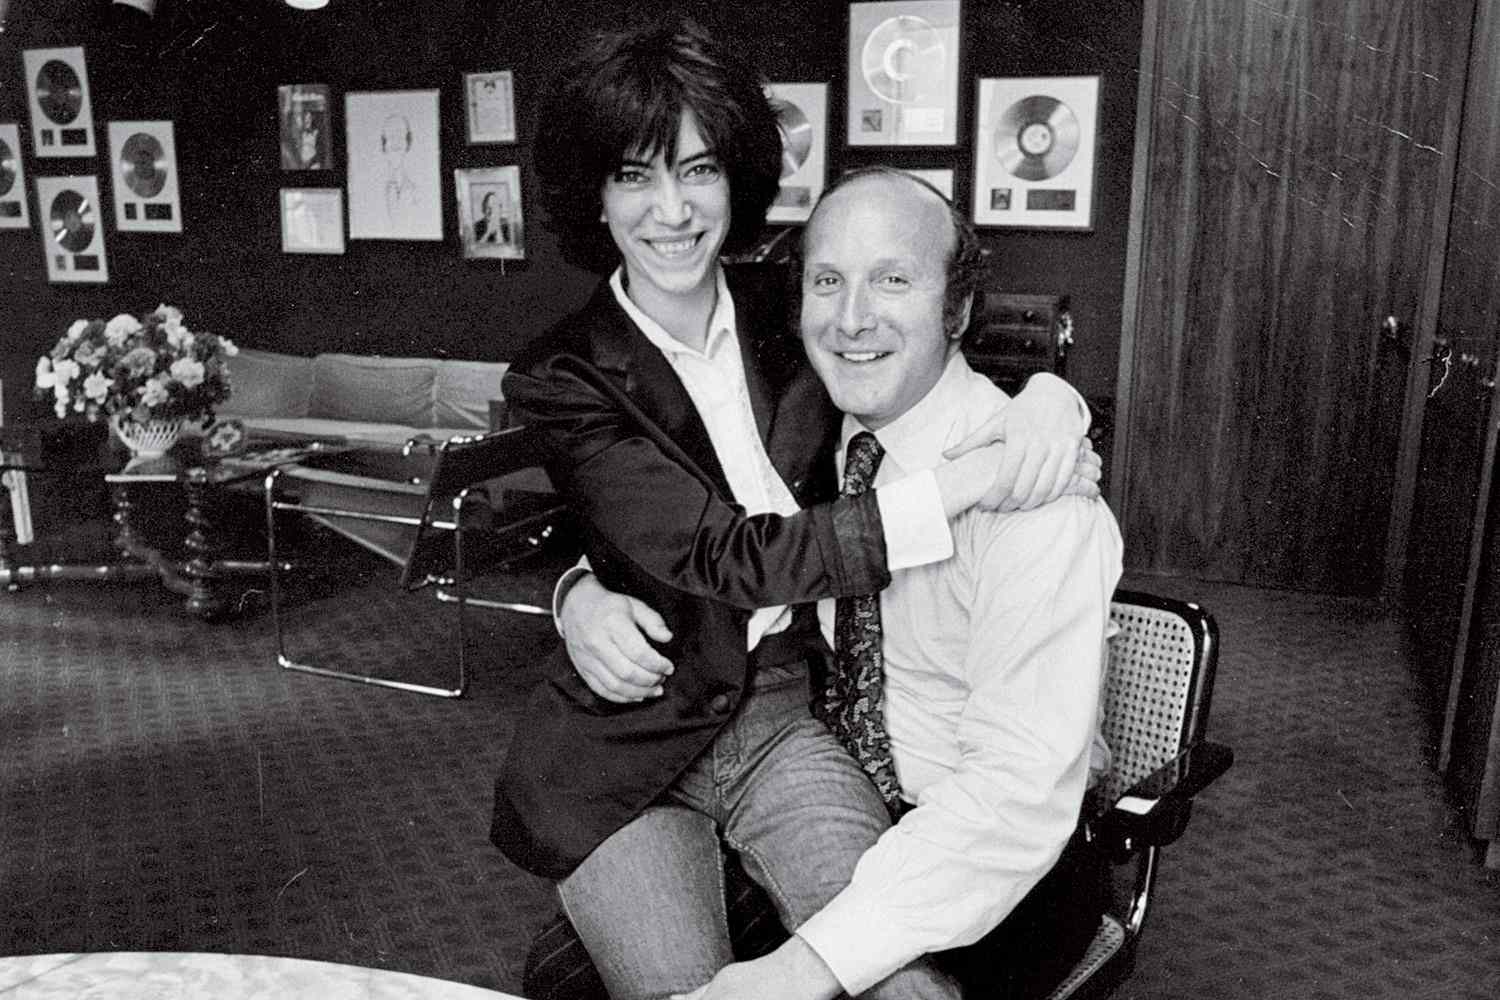 Clive Davis at his office April 1975 with Patti Smith Credit Clive Davis personal collection Emily Bender DKC Public Relations, Marketing & Government Affairs 261 Fifth Avenue, New York, NY 10016 T: (212) 981-5260 F: (212) 981-5460 emily_bender@dkcnews.com